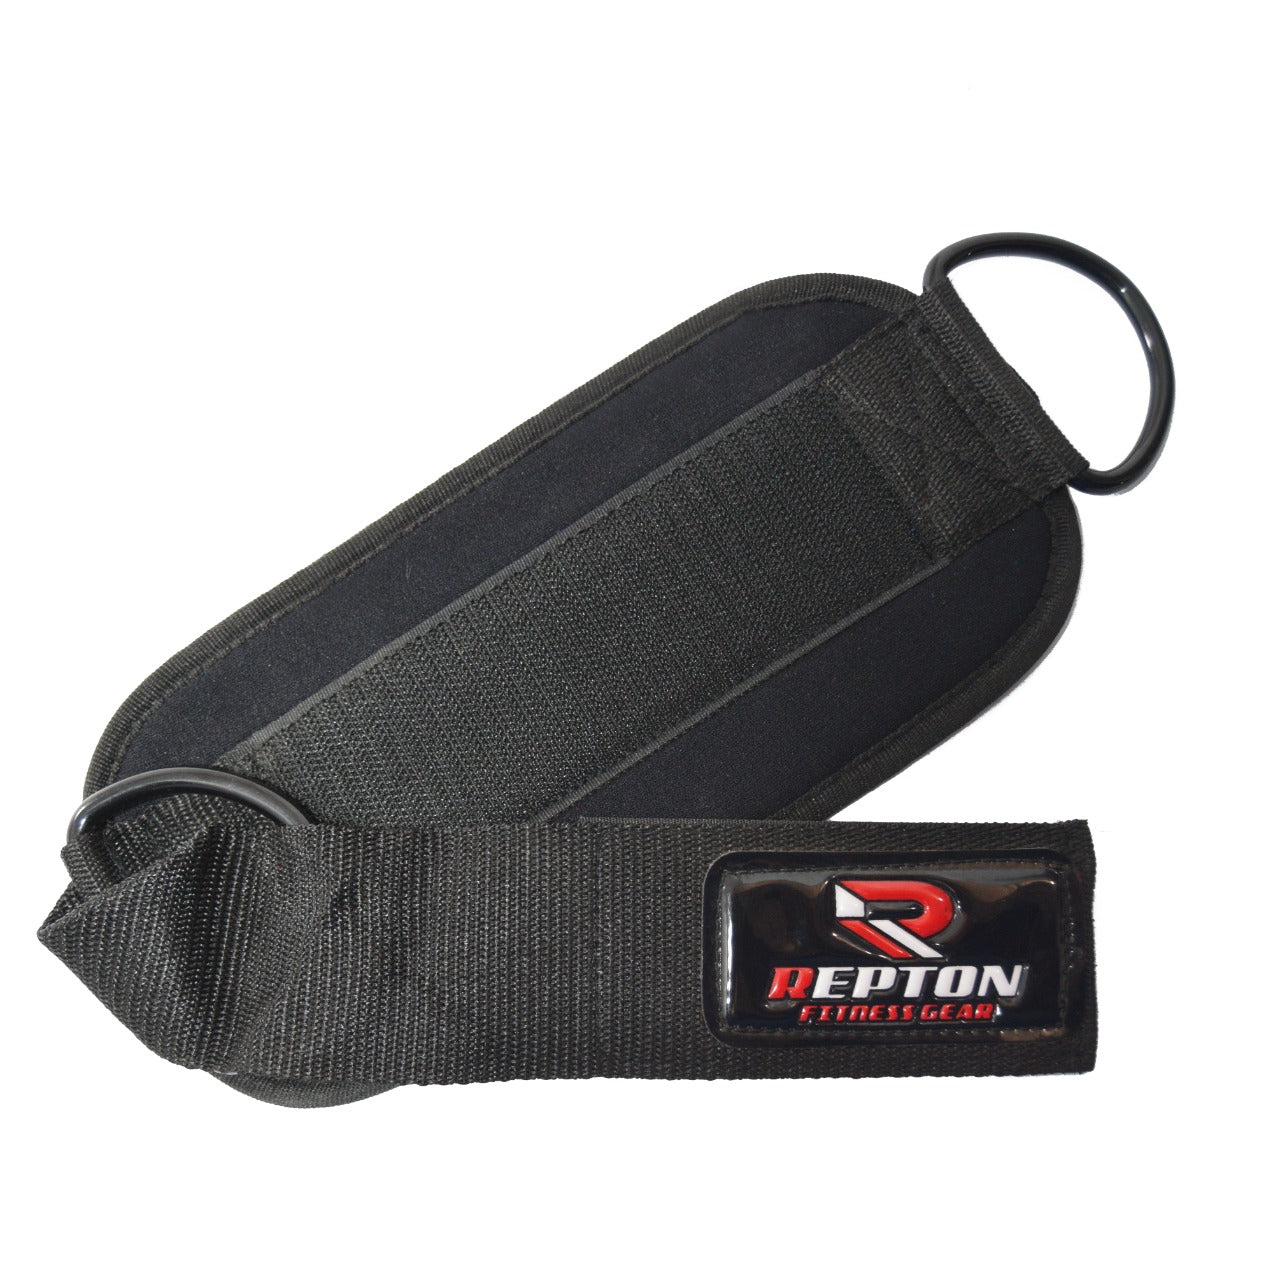 Ankle Straps for Cable Machines Attachments Neoprene Support Repton Fitness Gear